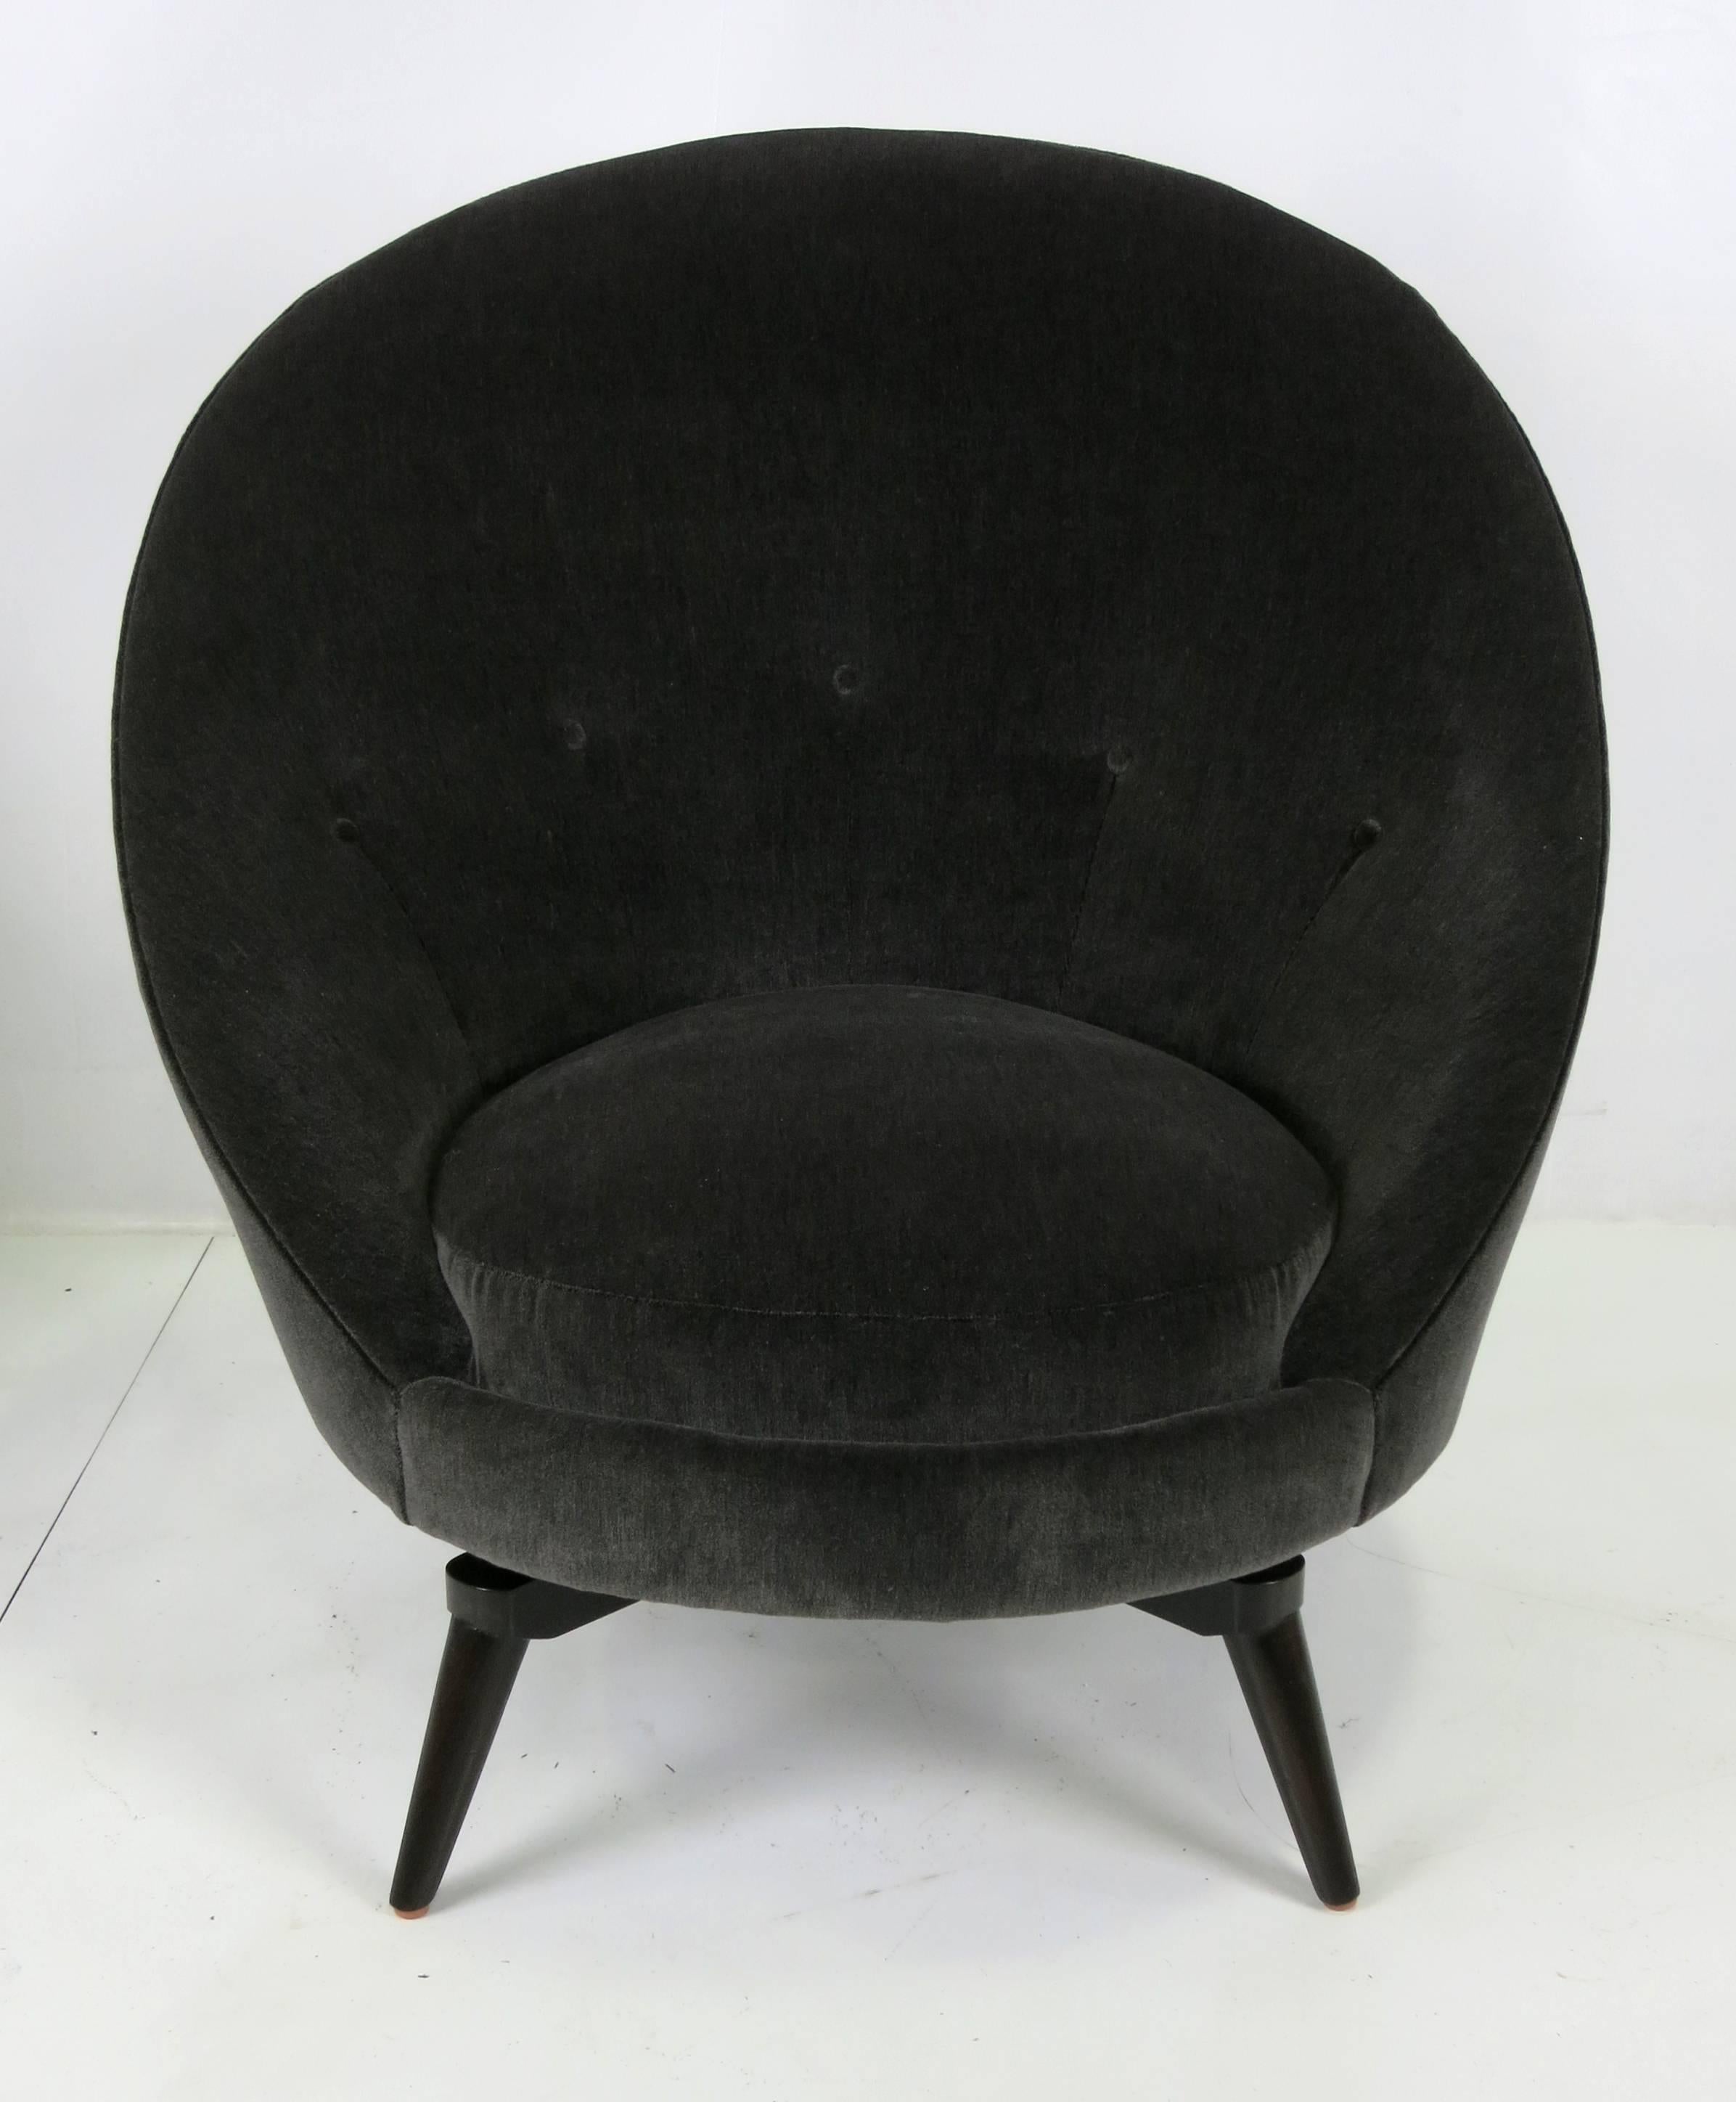 Pair of swivel egg chairs in the style of Jean Royère. The swivel bases have been reconstructed from the originals and are stouter and more durable, finished in dark brown lacquer. COM upholstery available upon request at an extra charge.